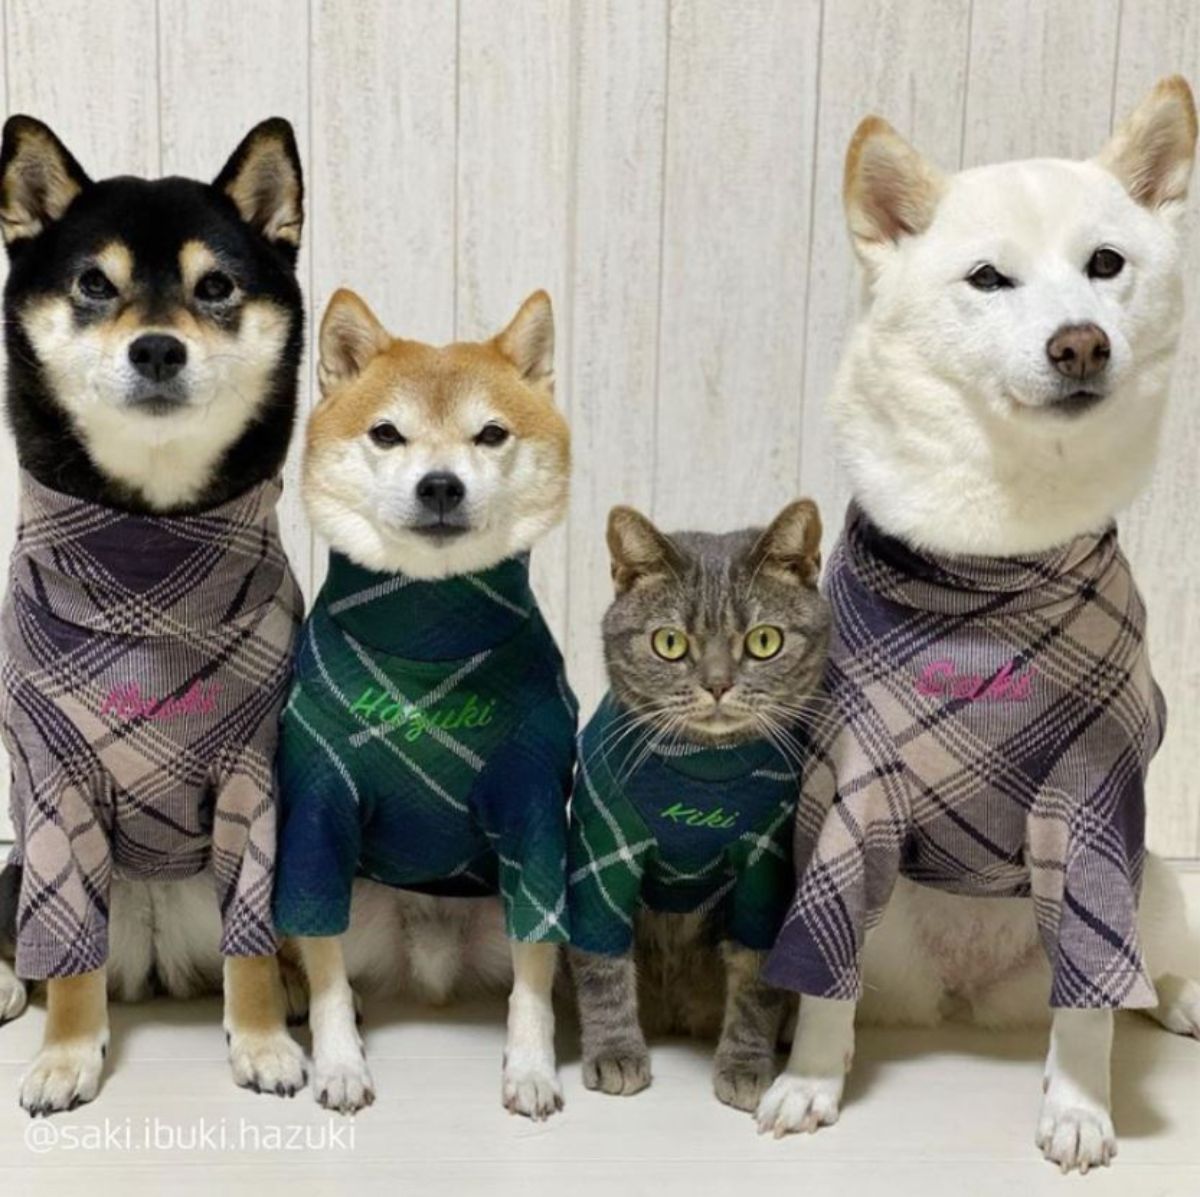 black and brown shiba inus grey tabby and white shiba inu dressed in sweaters